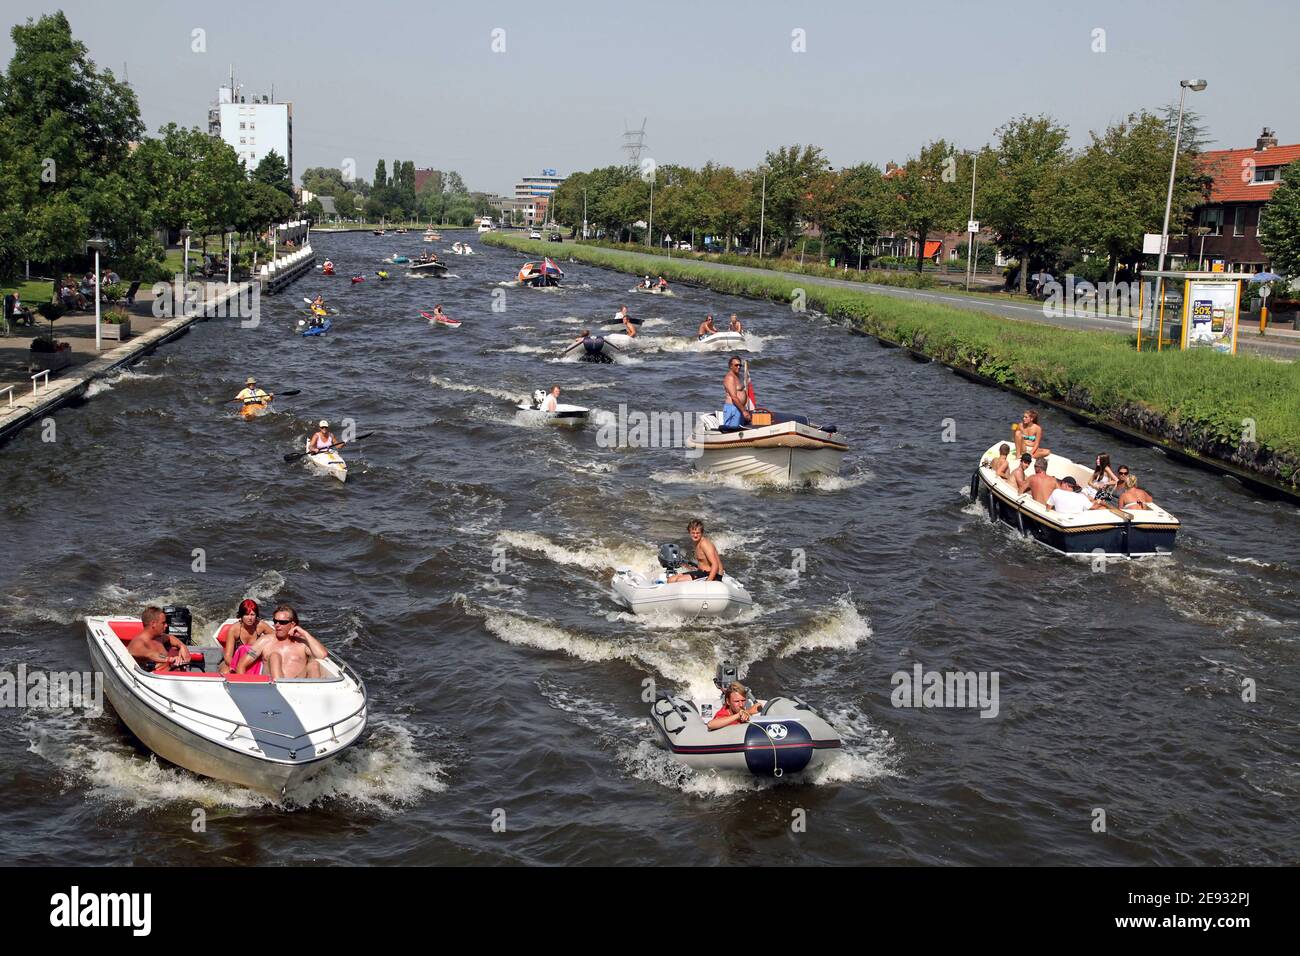 A group of boats in a canal in the Netherlands during high summer season.A pleasure crafts,pleasure boat, recreational craft Stock Photo